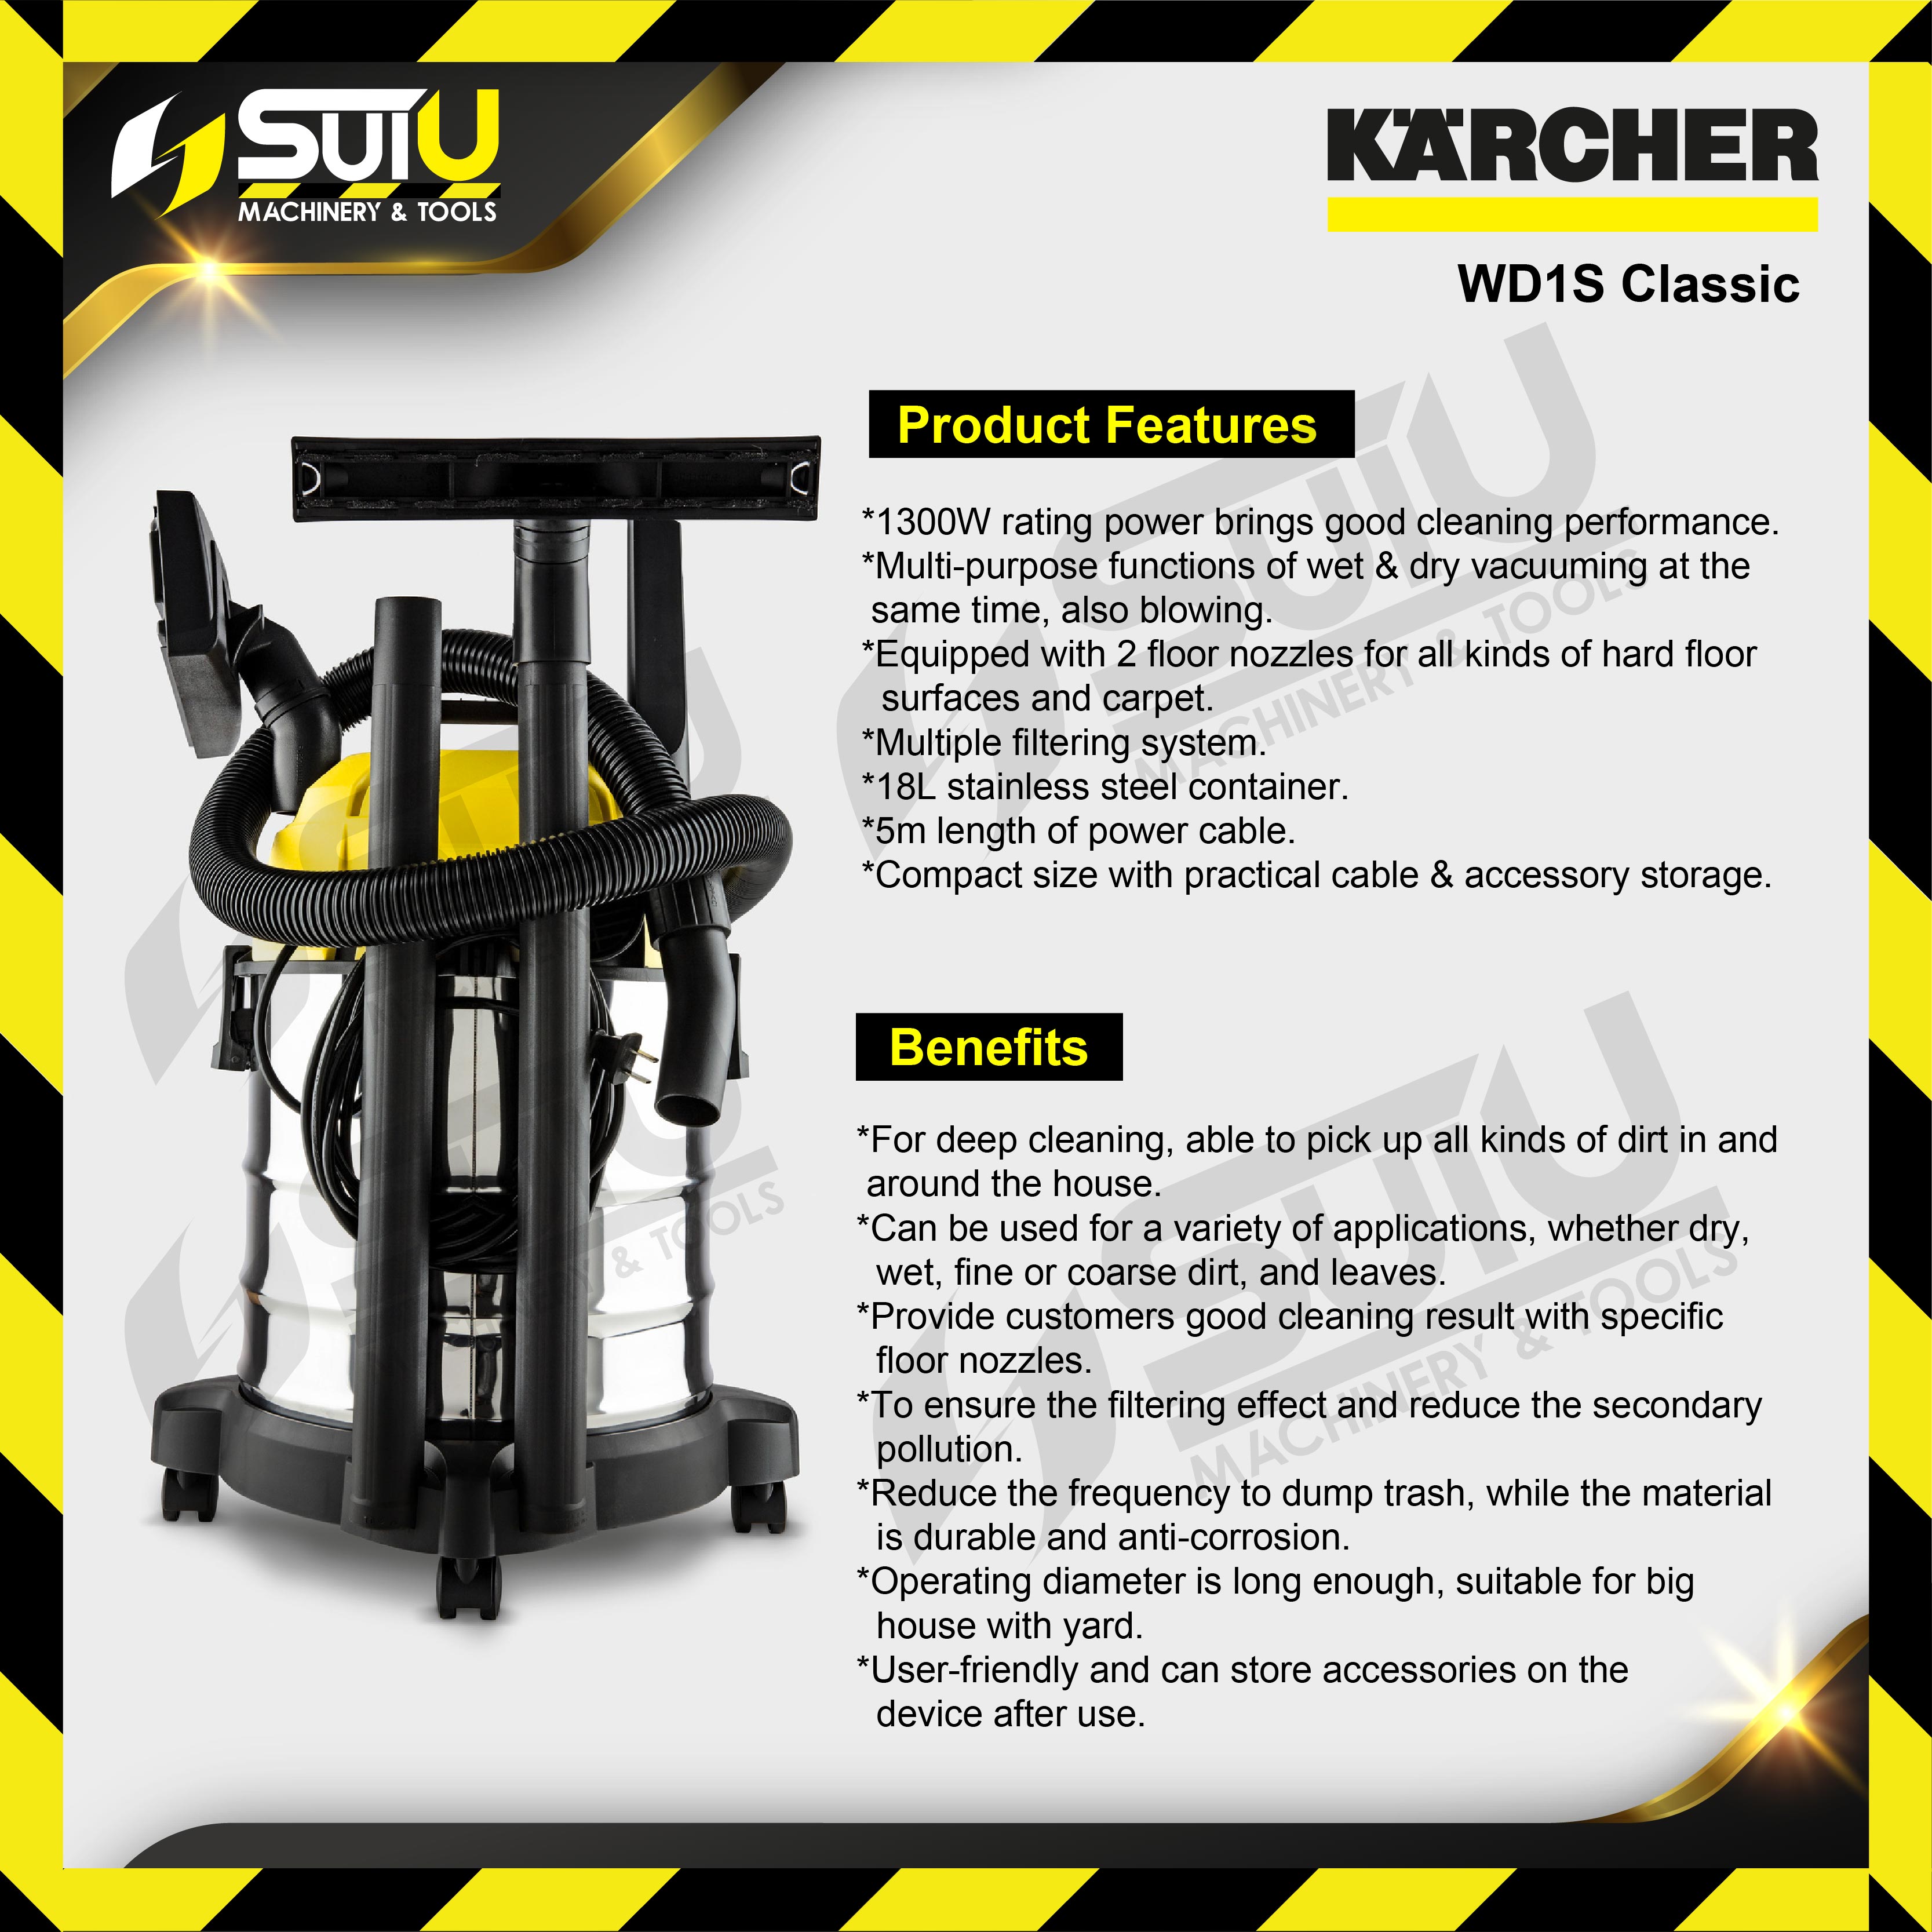 KARCHER WD1S Classic 18L Wet & Dry Vacuum Cleaner 1300W w/ Accessories  Vacuum Cleaner Cleaning Equipment Kuala Lumpur (KL), Malaysia, Selangor,  Setapak Supplier, Suppliers, Supply, Supplies | Sui U Machinery & Tools (